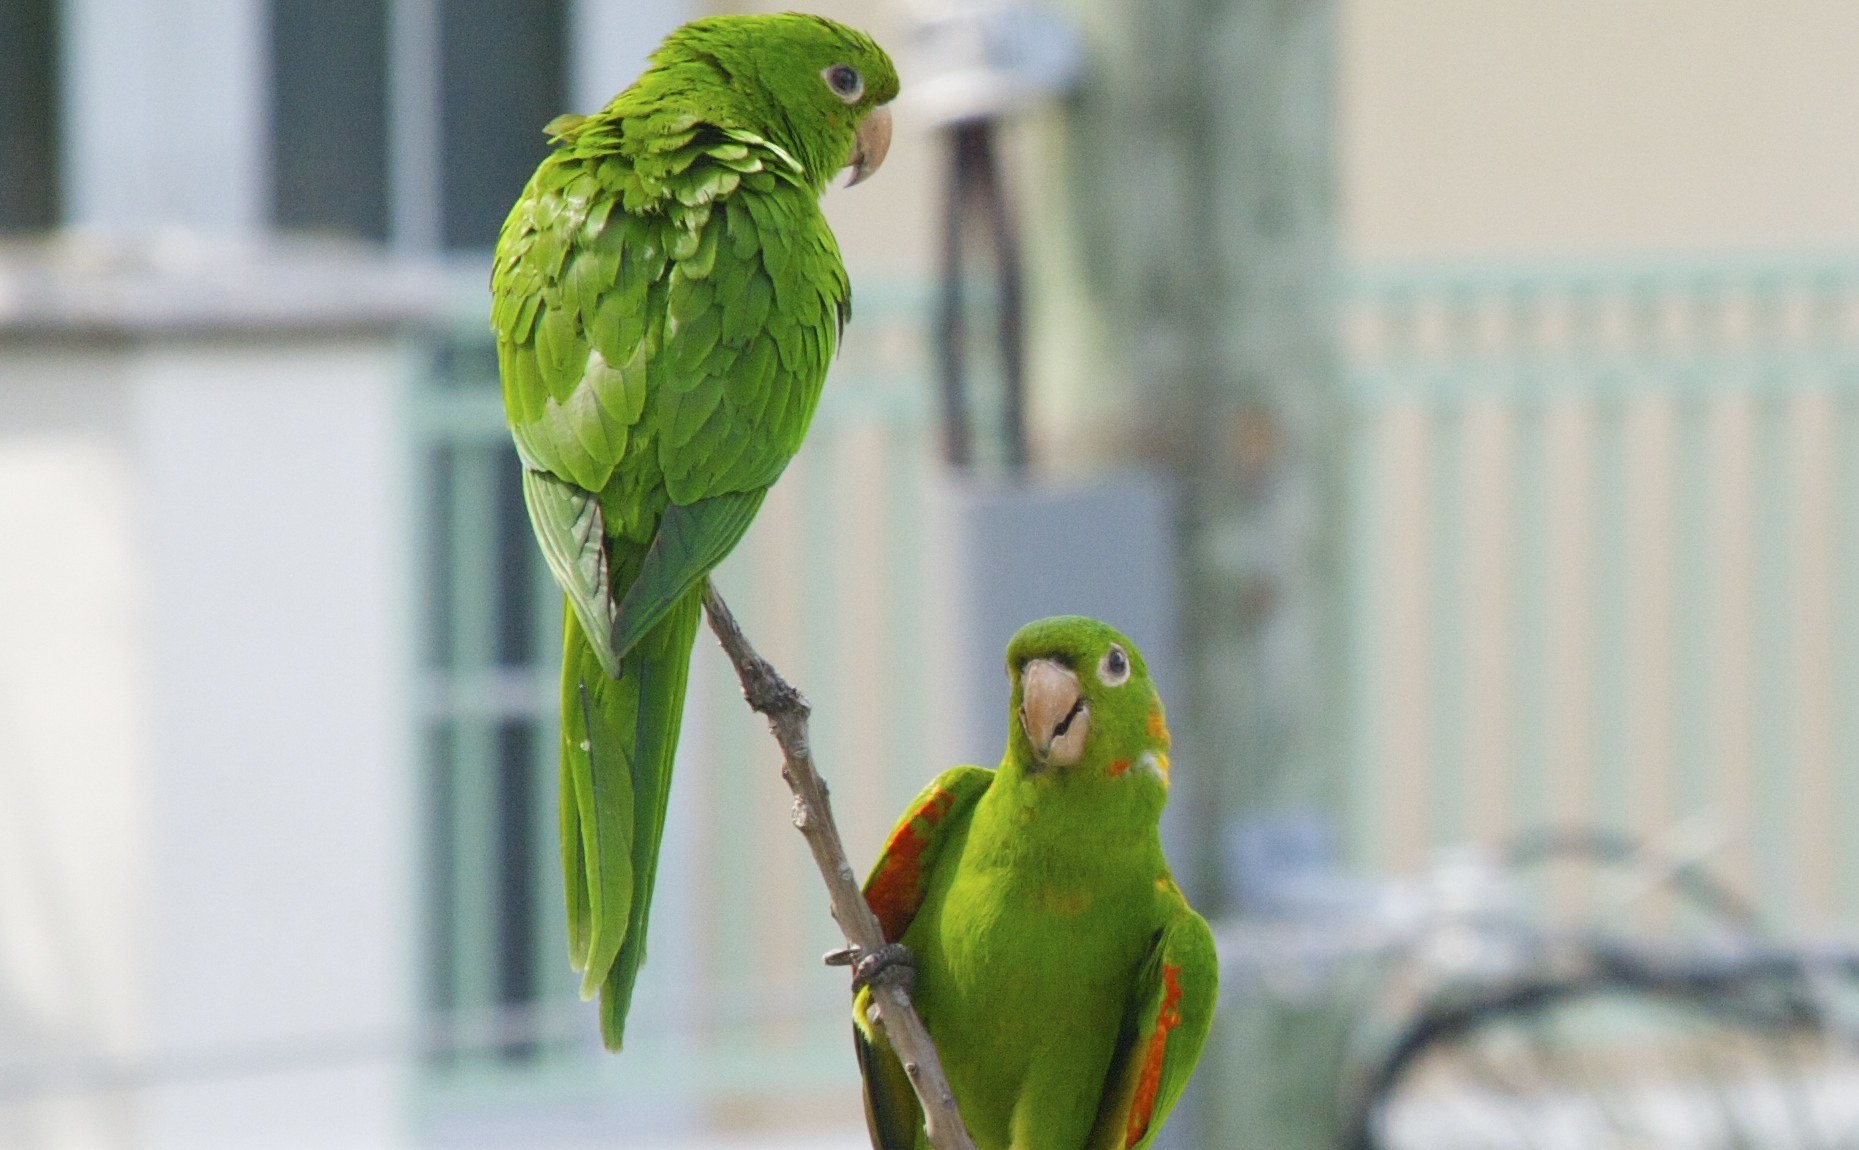 Two mitred parakeets